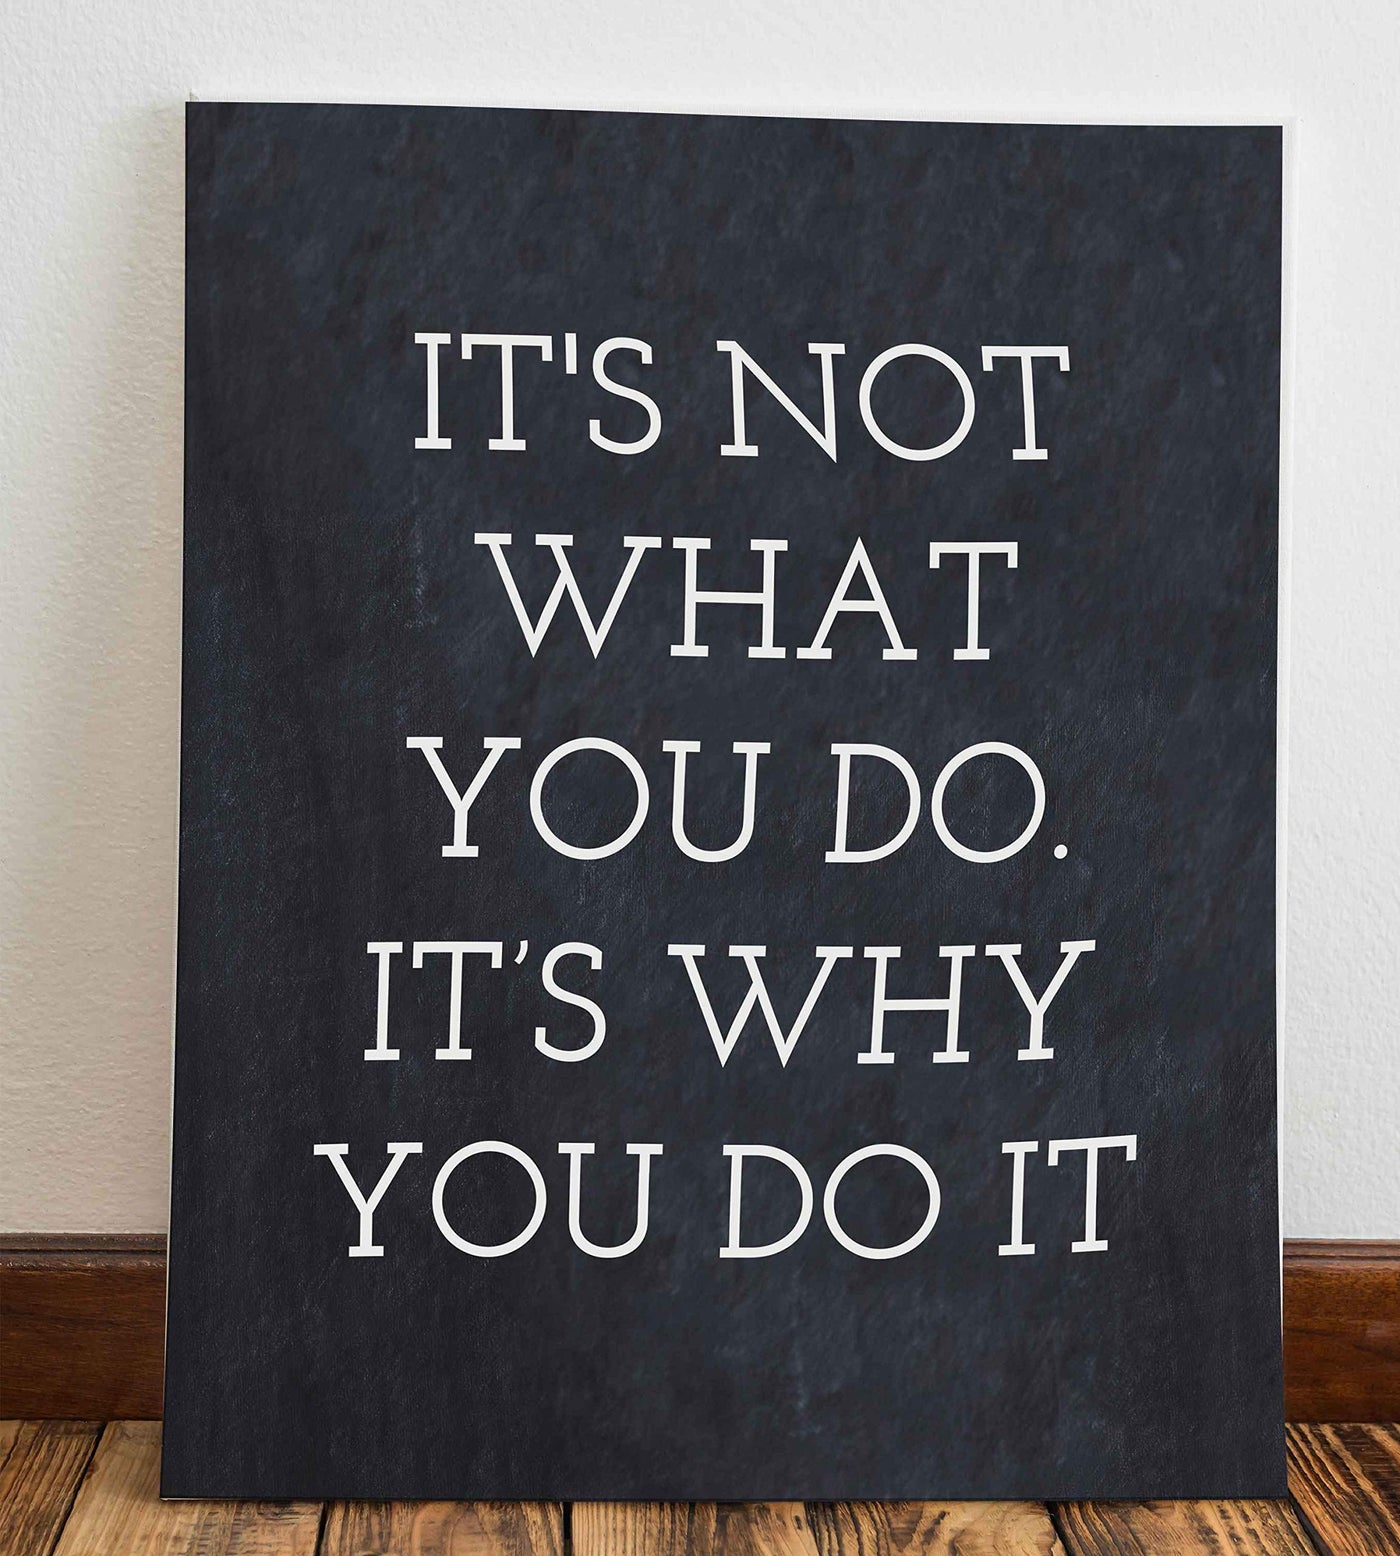 It's Not What You Do It's Why You Do It-Inspirational Quotes Wall Art -8 x 10" Modern Typographic Poster Print-Ready to Frame. Home-Office-Studio-Dorm Decor. Perfect Motivational Gift for All!